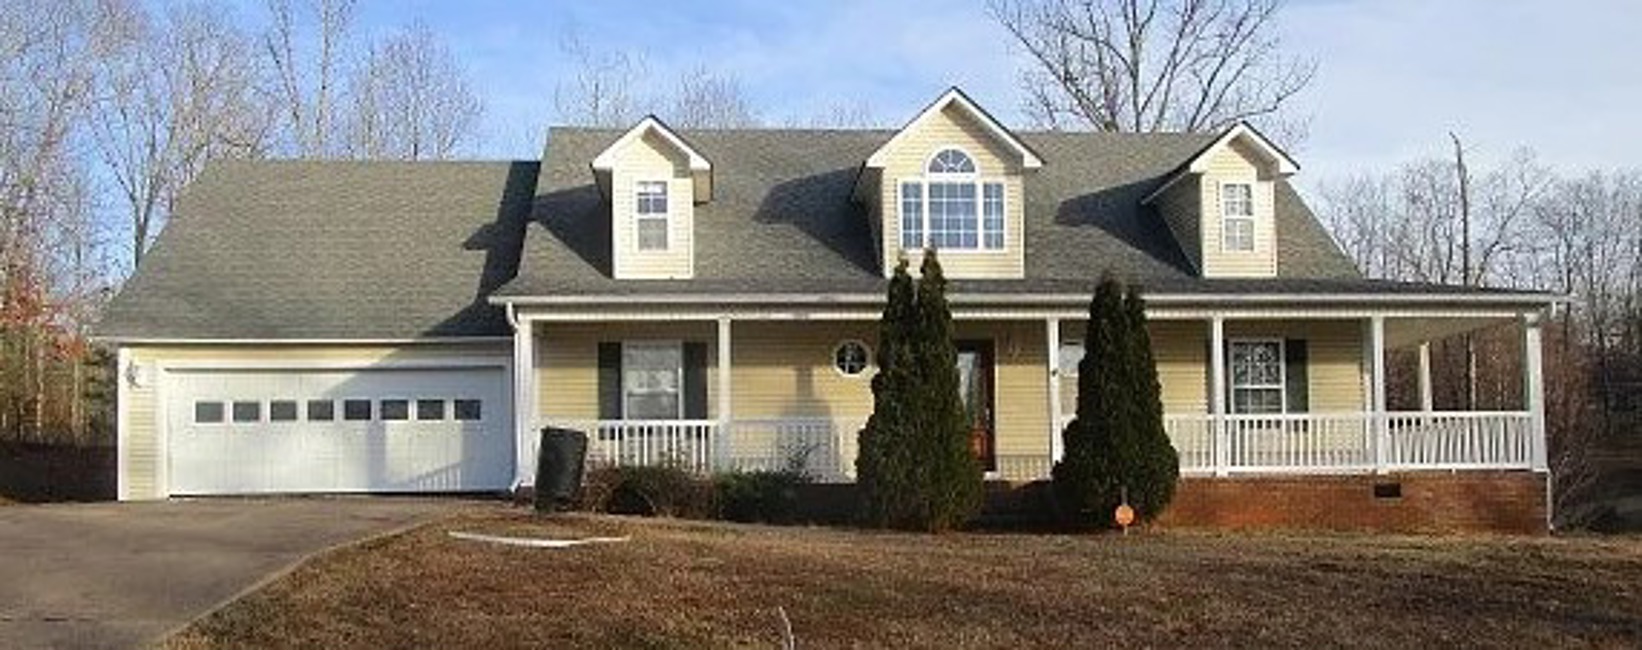 Foreclosure Trustee, 298 Countrywoods Dr, Selmer, TN 38375